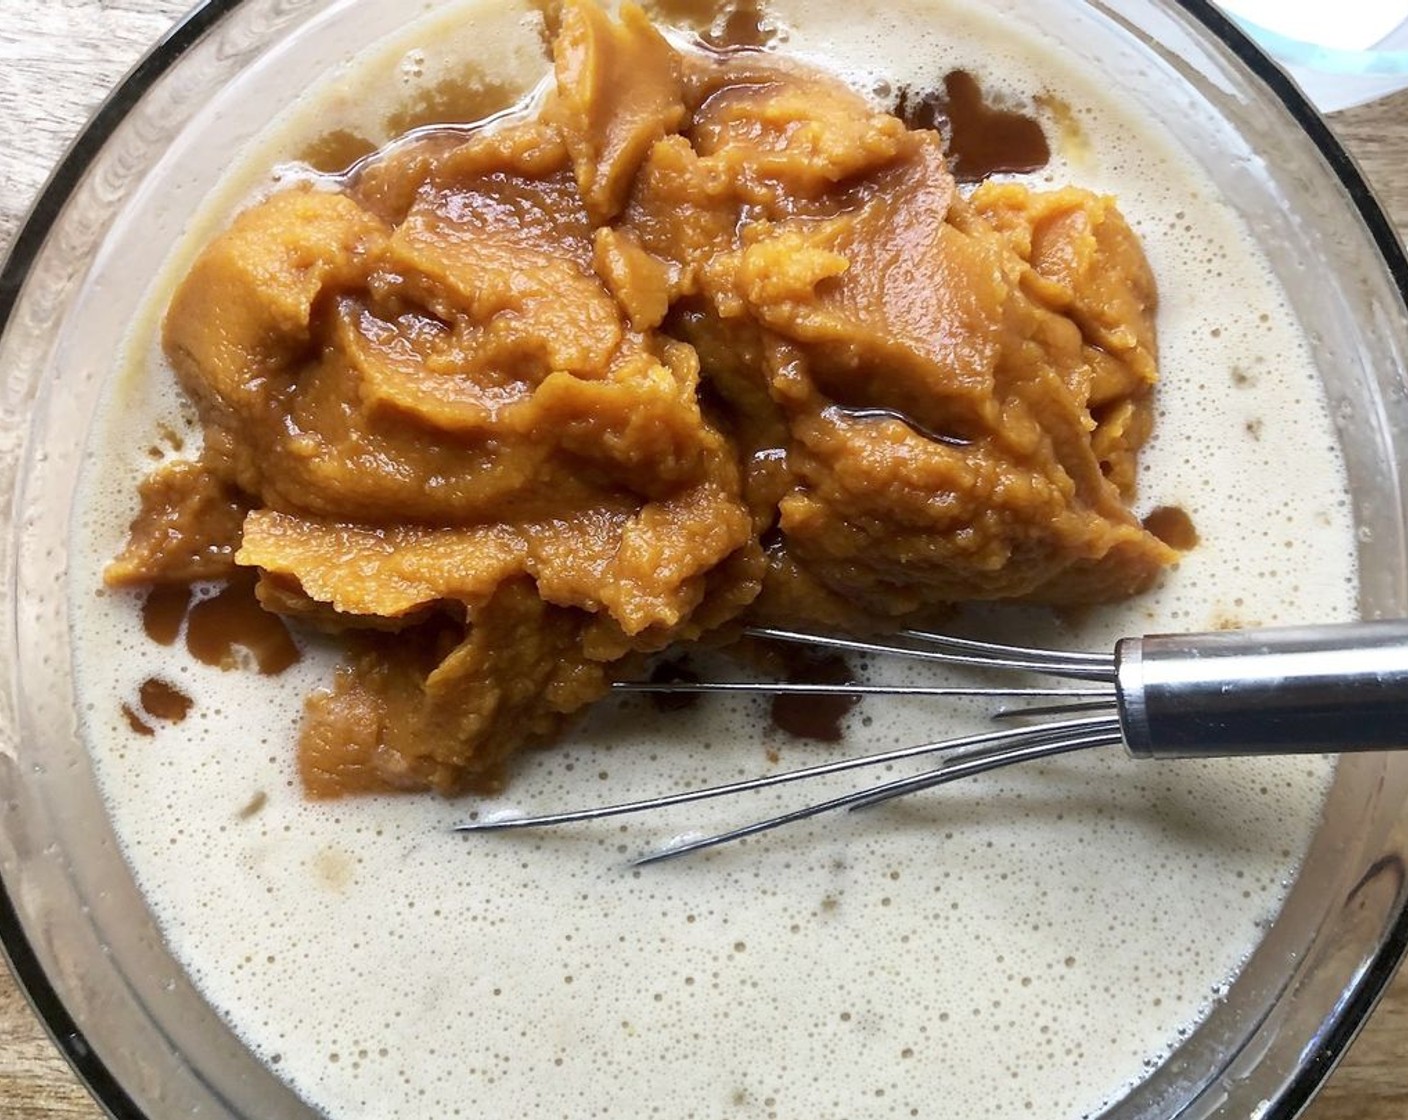 step 8 In a large bowl, whisk the {@10:}, Granulated Sugar (1 cup) and Dark Brown Sugar (1/2 cup) to combine. Whisk in the Heavy Cream (1 cup), then the Canned Pumpkin Purée (3 3/4 cups) and Pure Vanilla Extract (1/2 Tbsp). Add the Ground Cinnamon (1 Tbsp), Ground Ginger (1/2 Tbsp), Ground Allspice (1 tsp), Ground Nutmeg (1/2 tsp) and Fine Sea Salt (1/2 tsp) and whisk to combine.